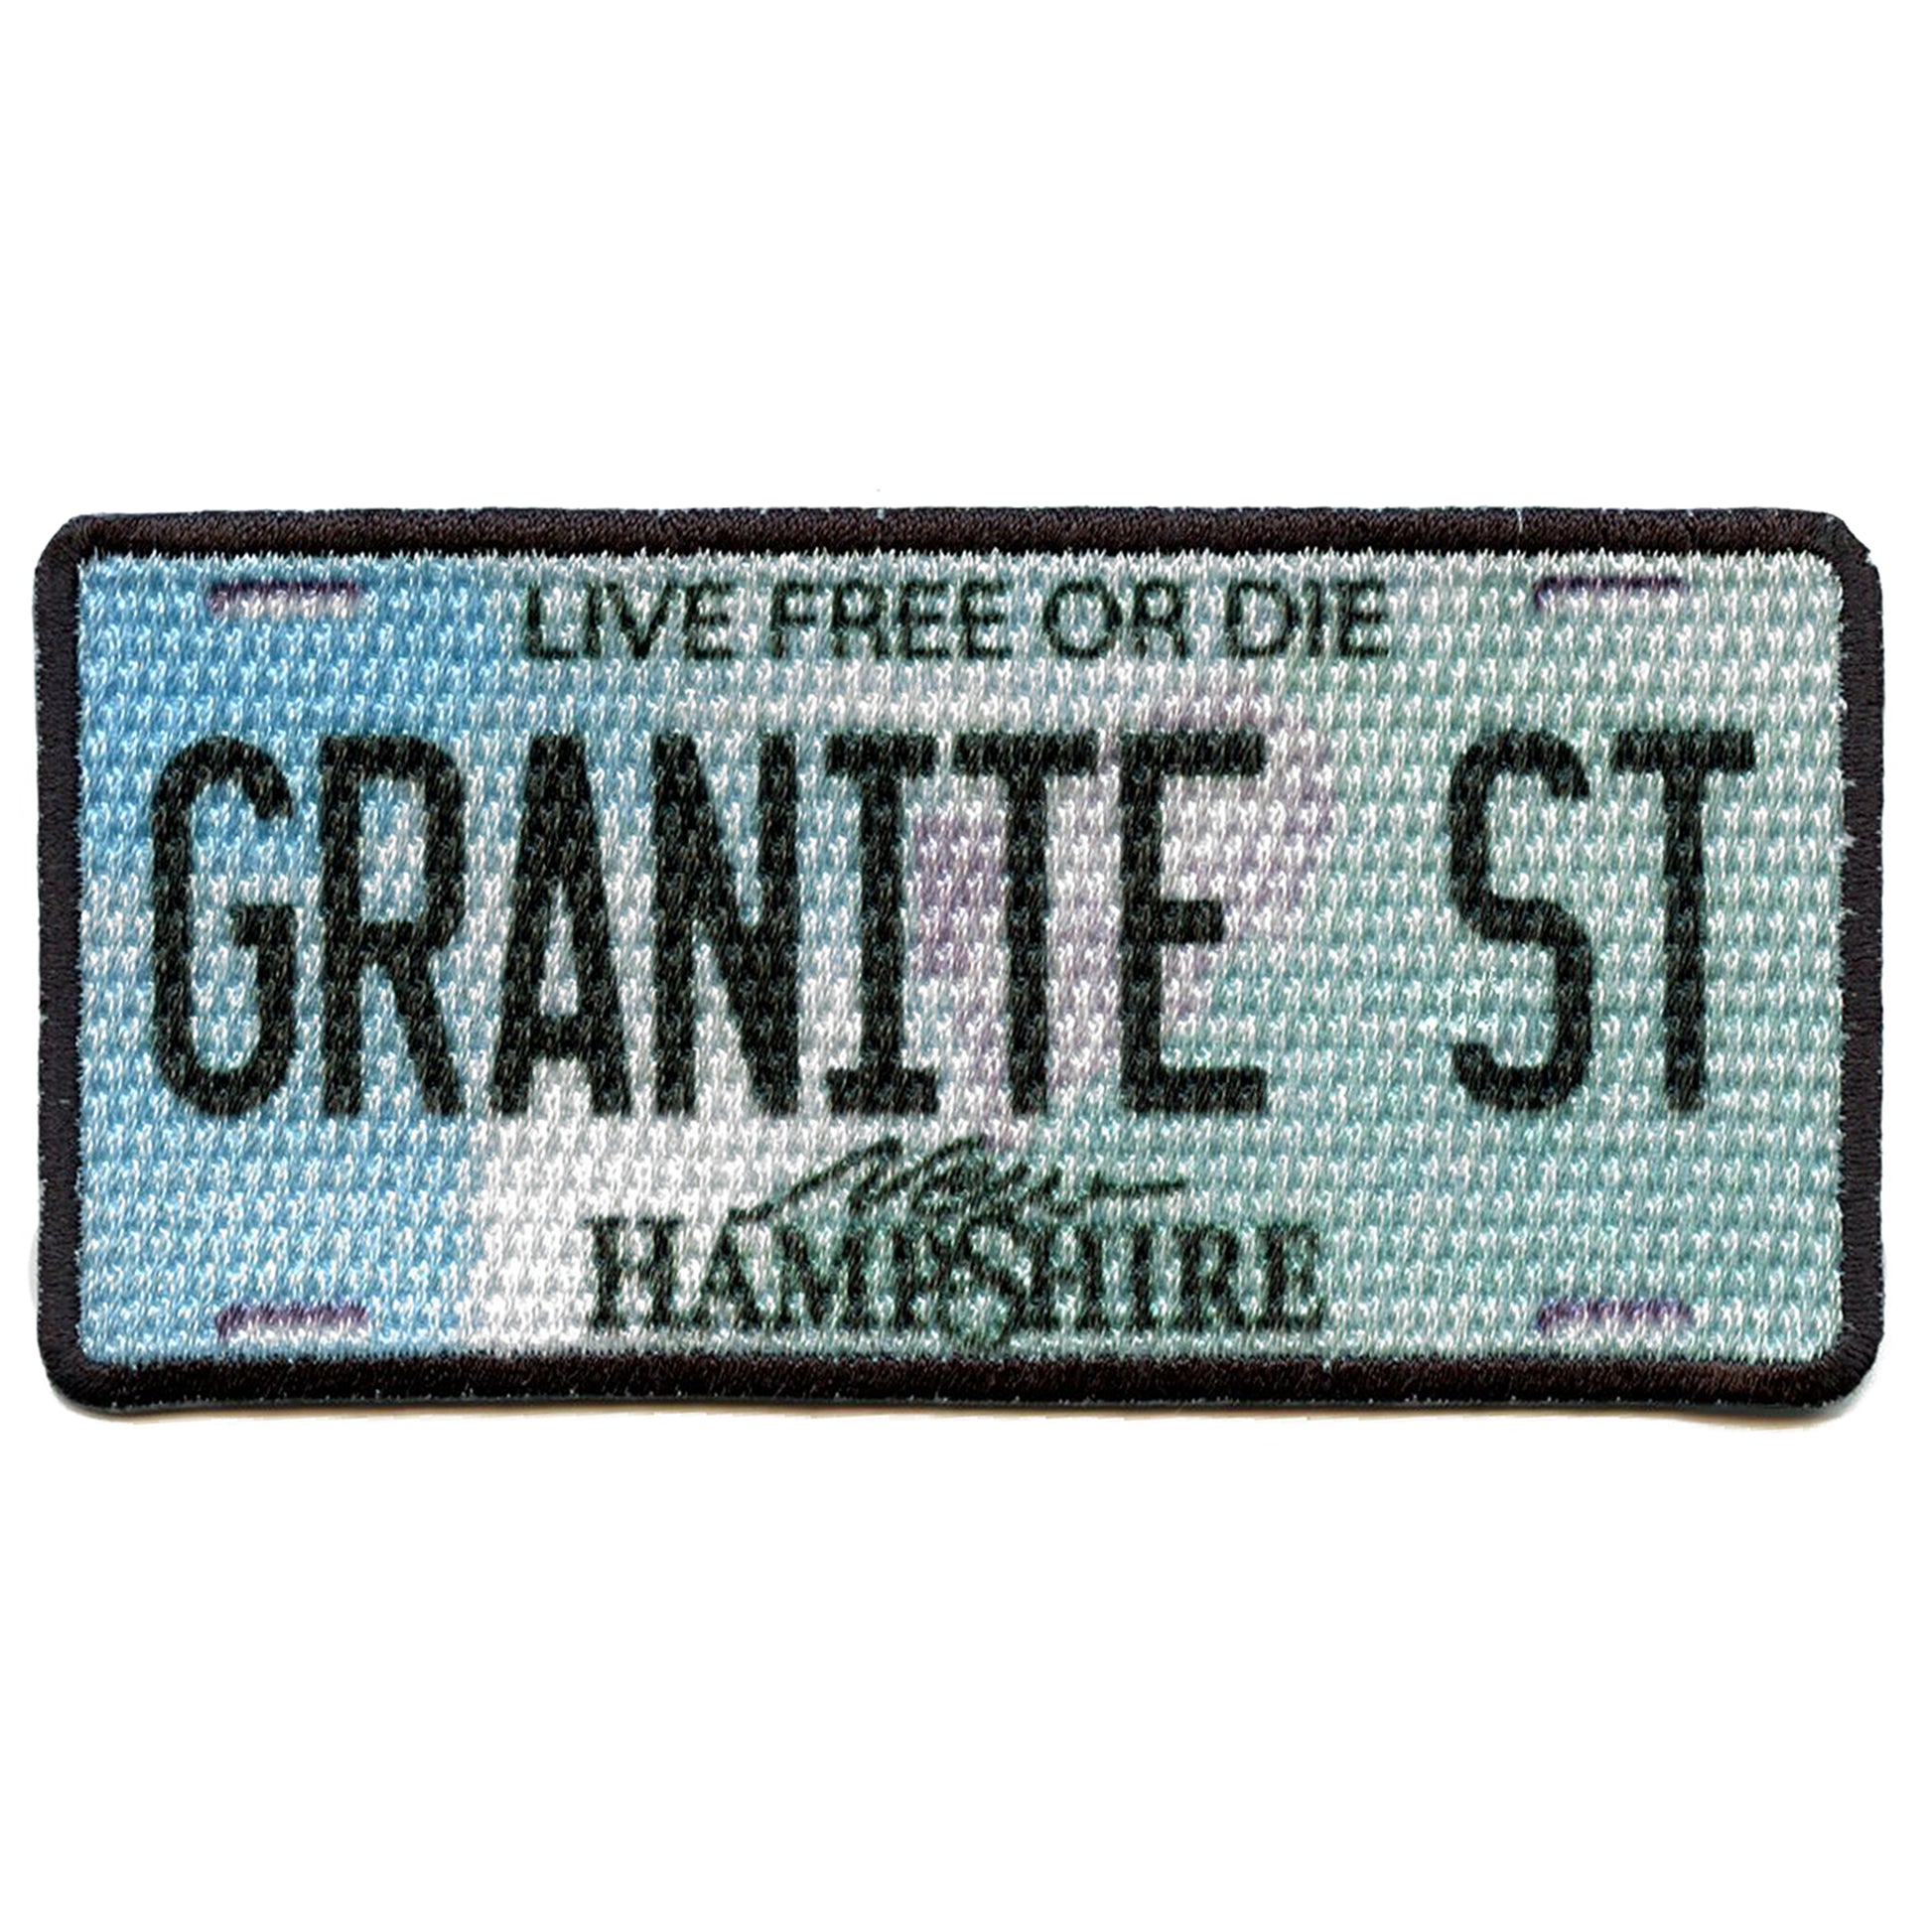 New Hampshire State License Plate Patch Live Free Granite Sublimated Iron On